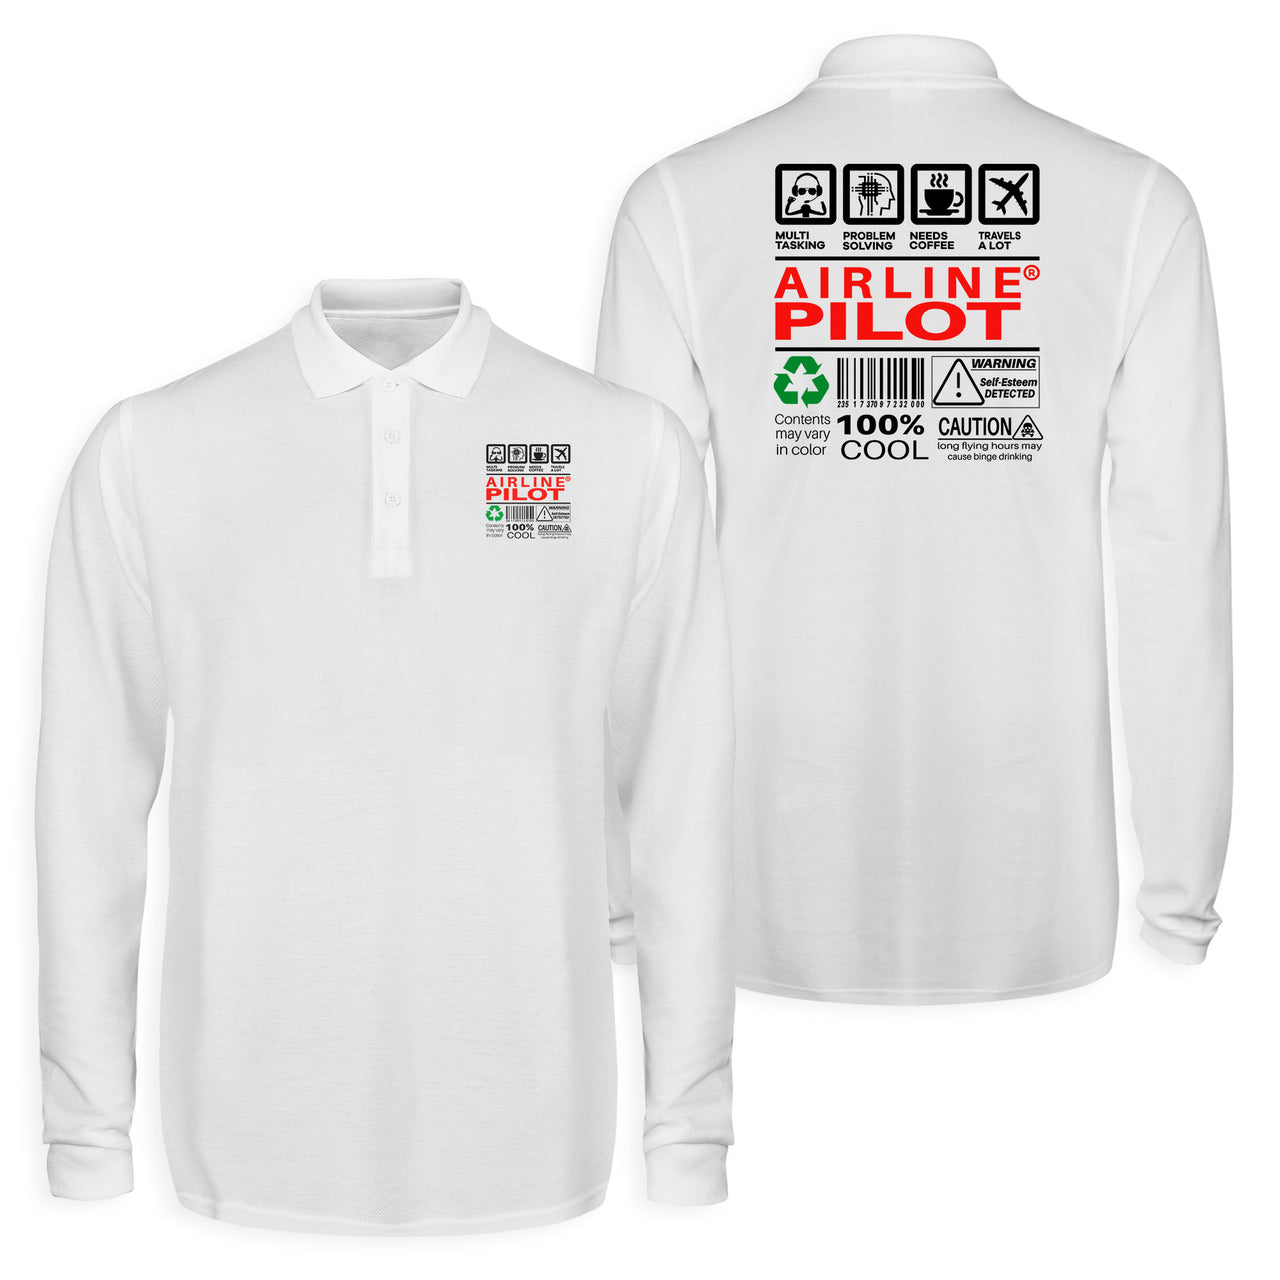 Airline Pilot Label Designed Long Sleeve Polo T-Shirts (Double-Side)